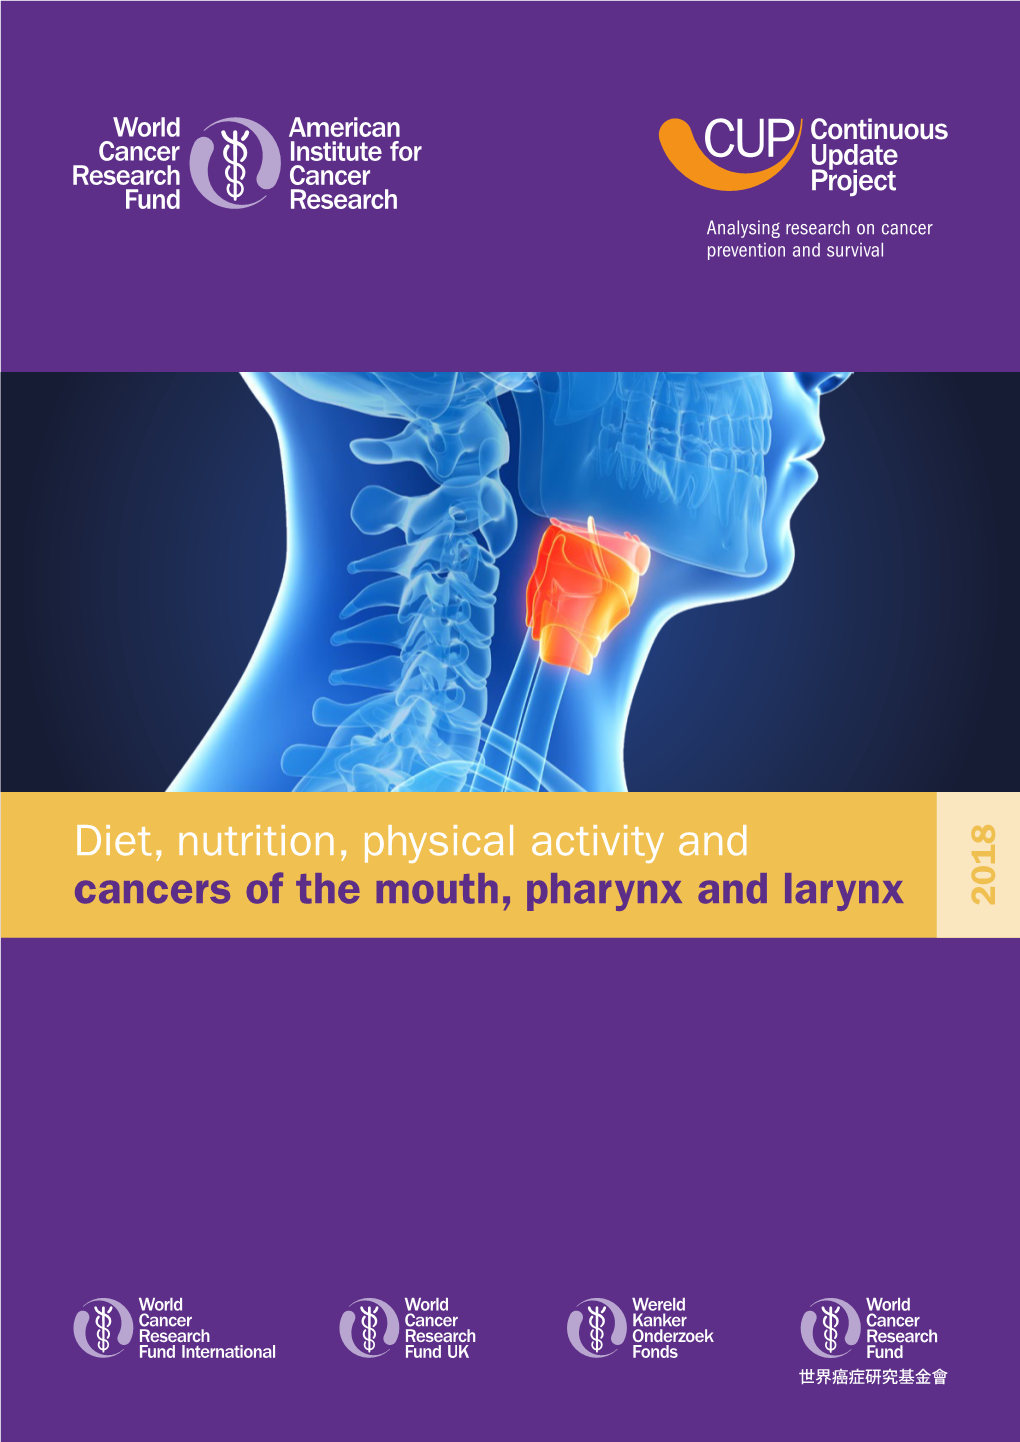 Diet, Nutrition, Physical Activity and Cancers of the Mouth, Pharynx And